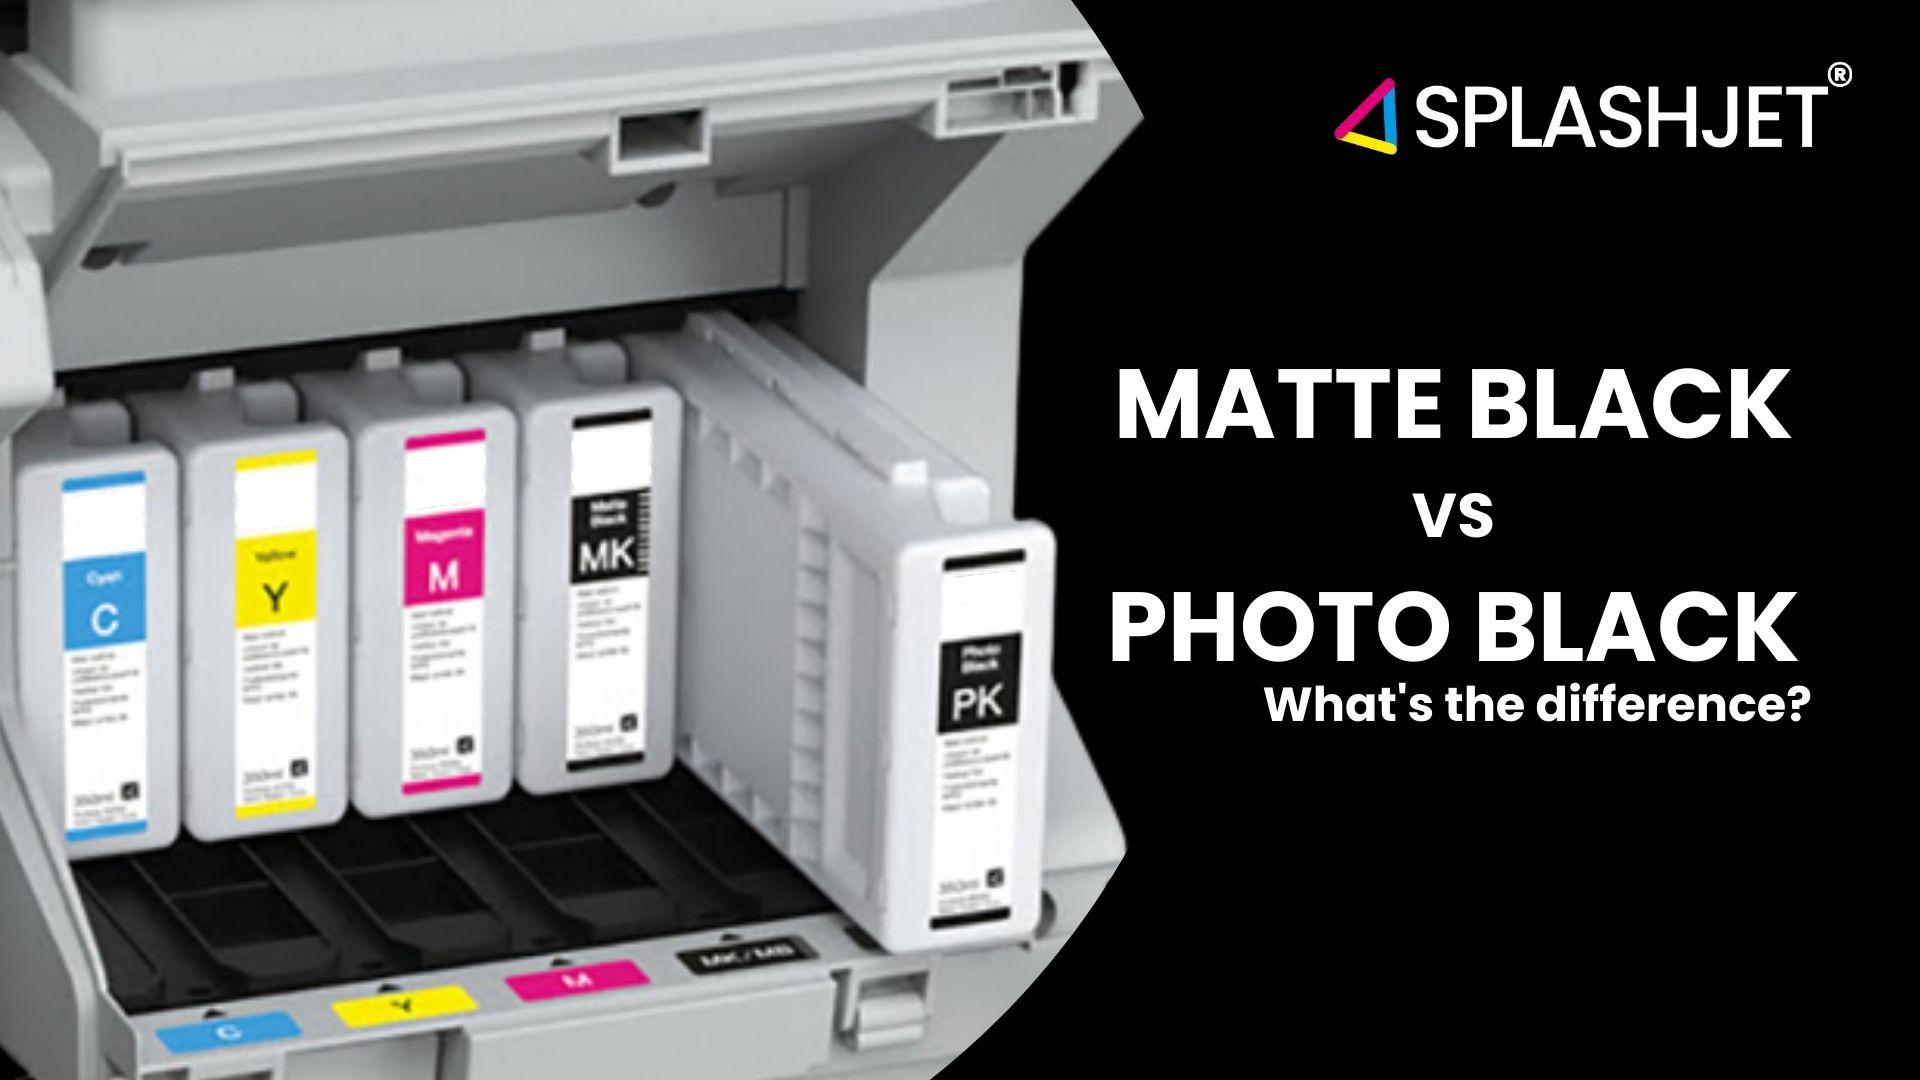 Matte Black & Photo Black – What’s the difference?